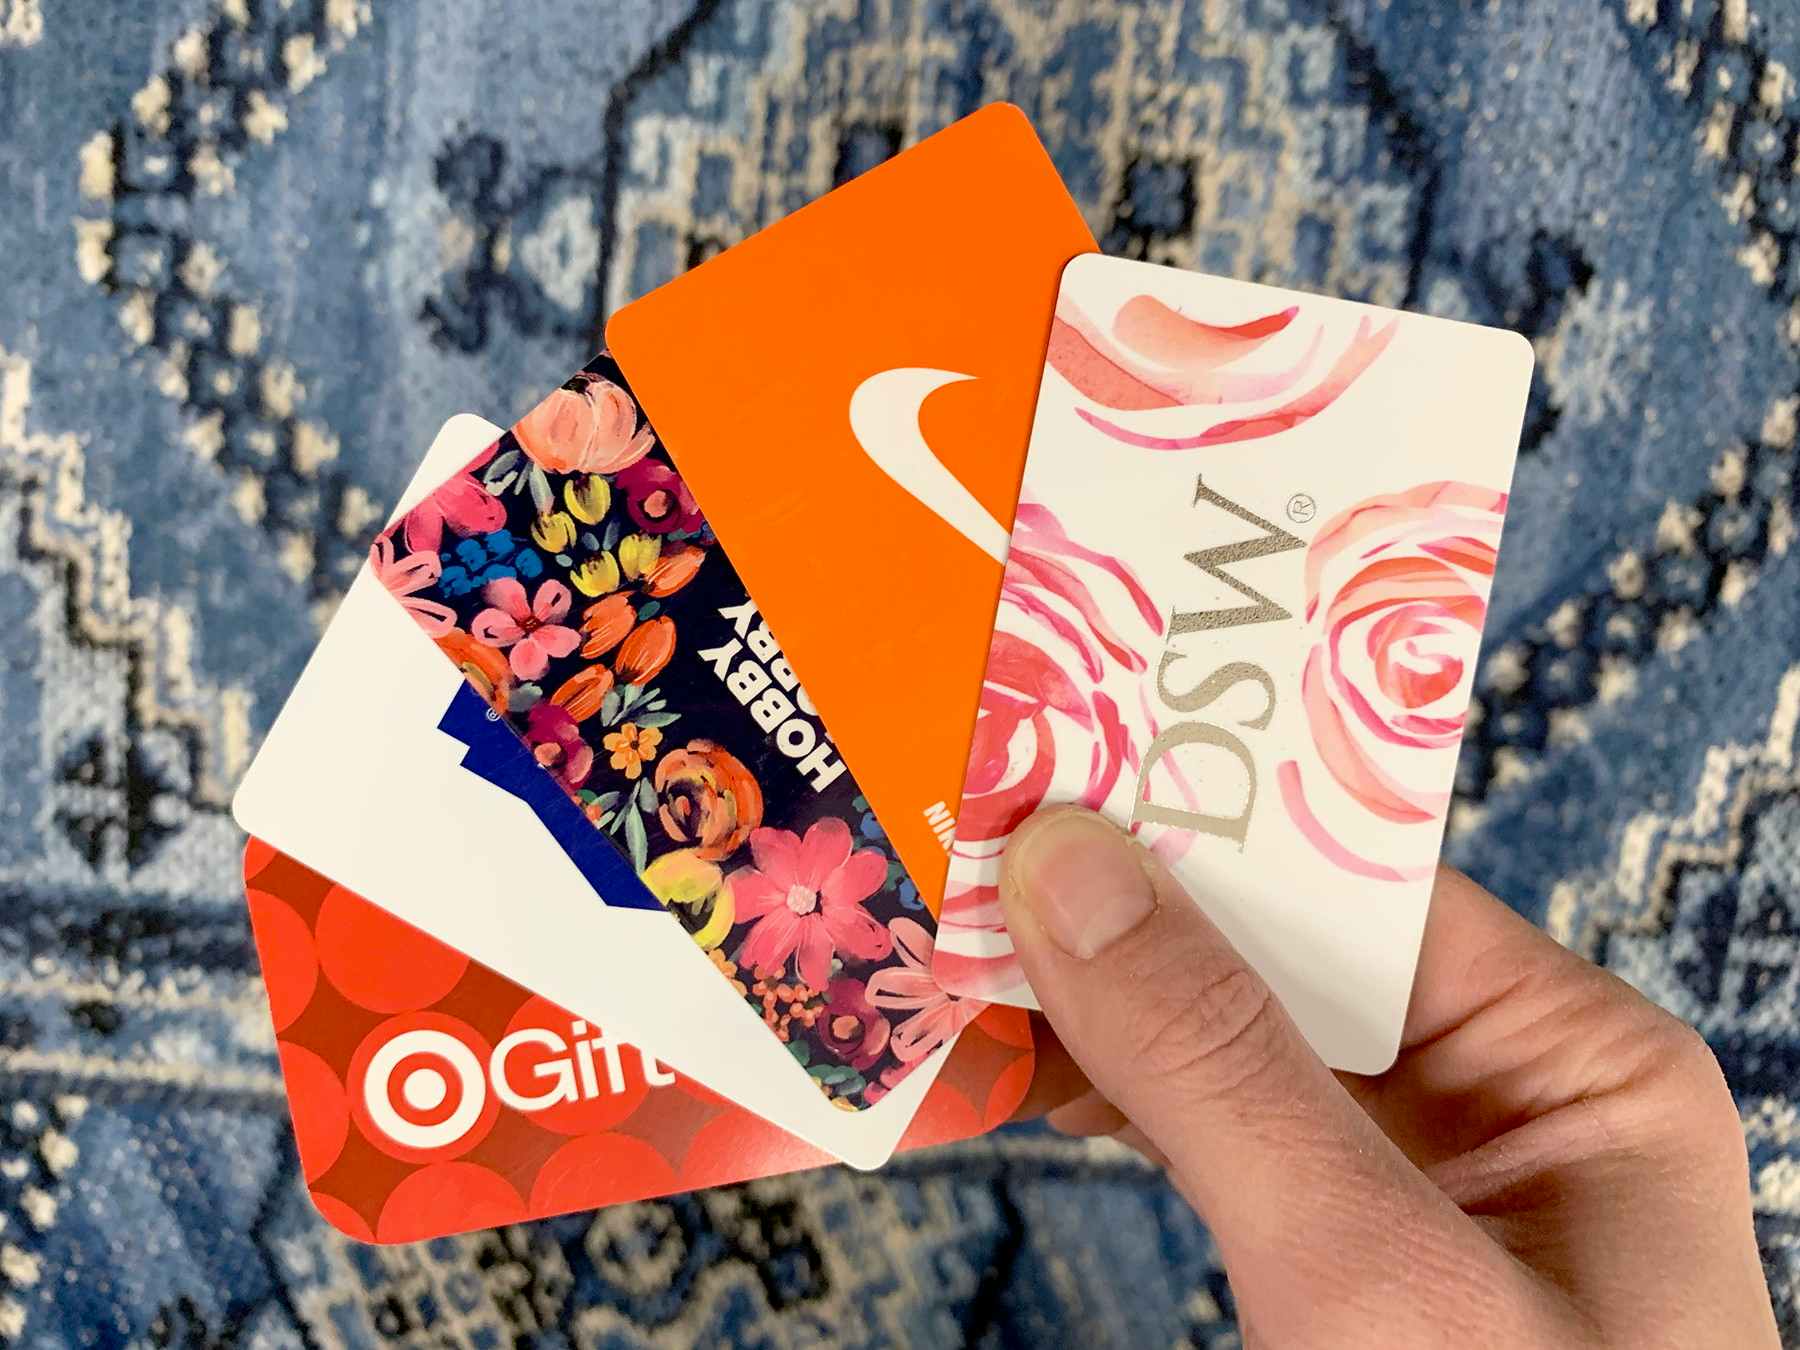 A person holding gift cards for Target, Lowe's, Nike, DSW, and Hobby Lobby.